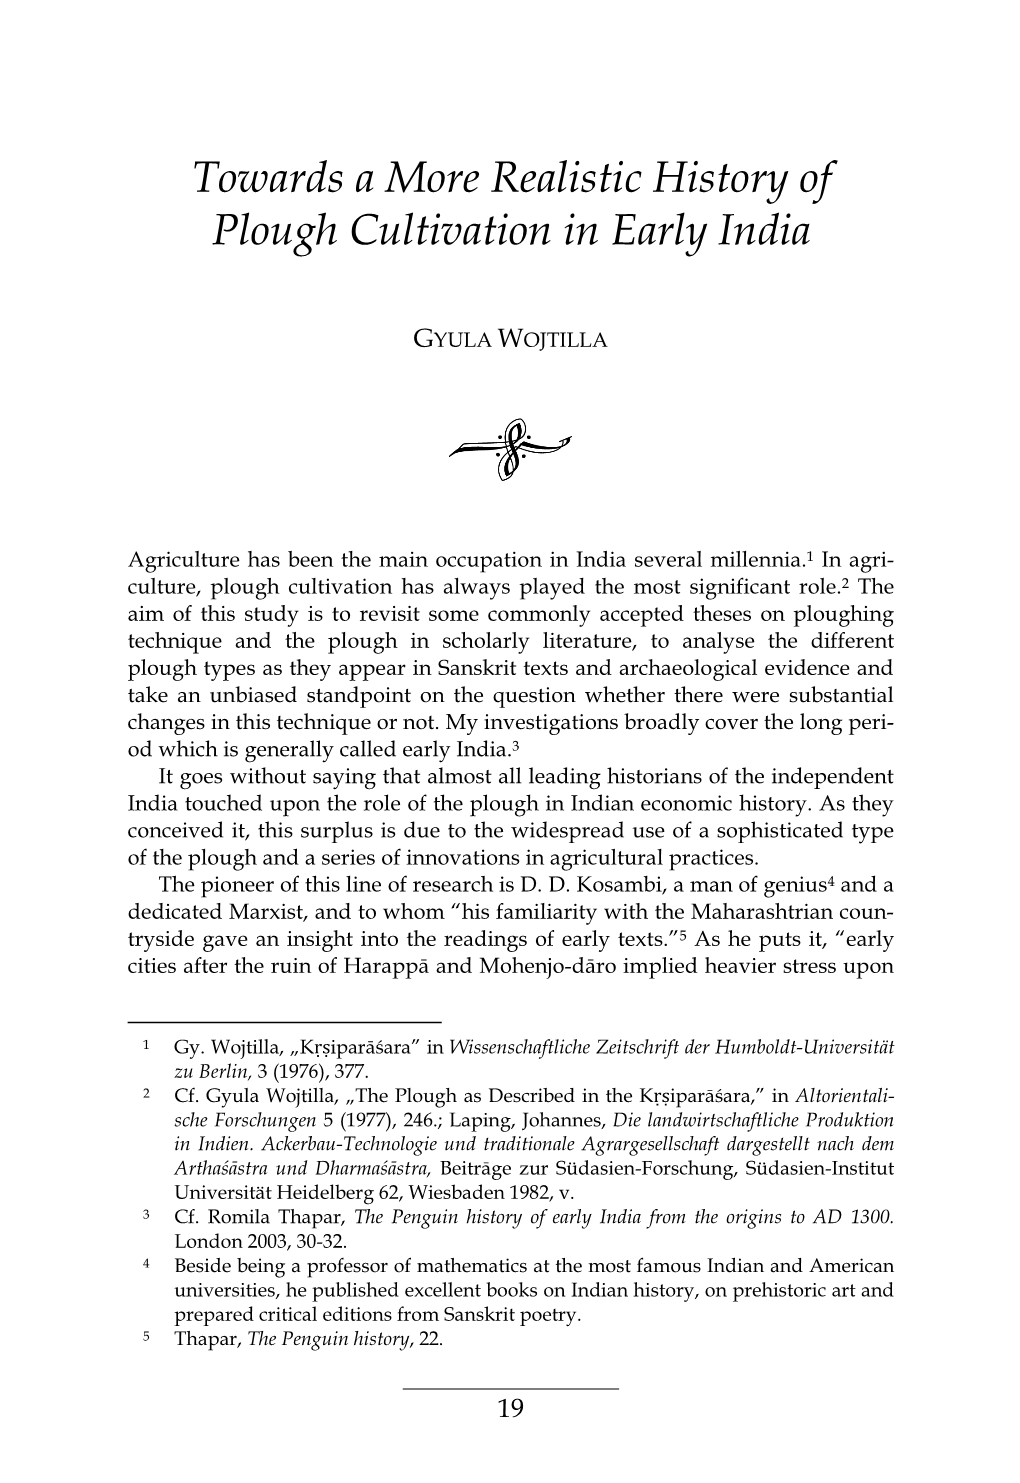 Towards a More Realistic History of Plough Cultivation in Early India